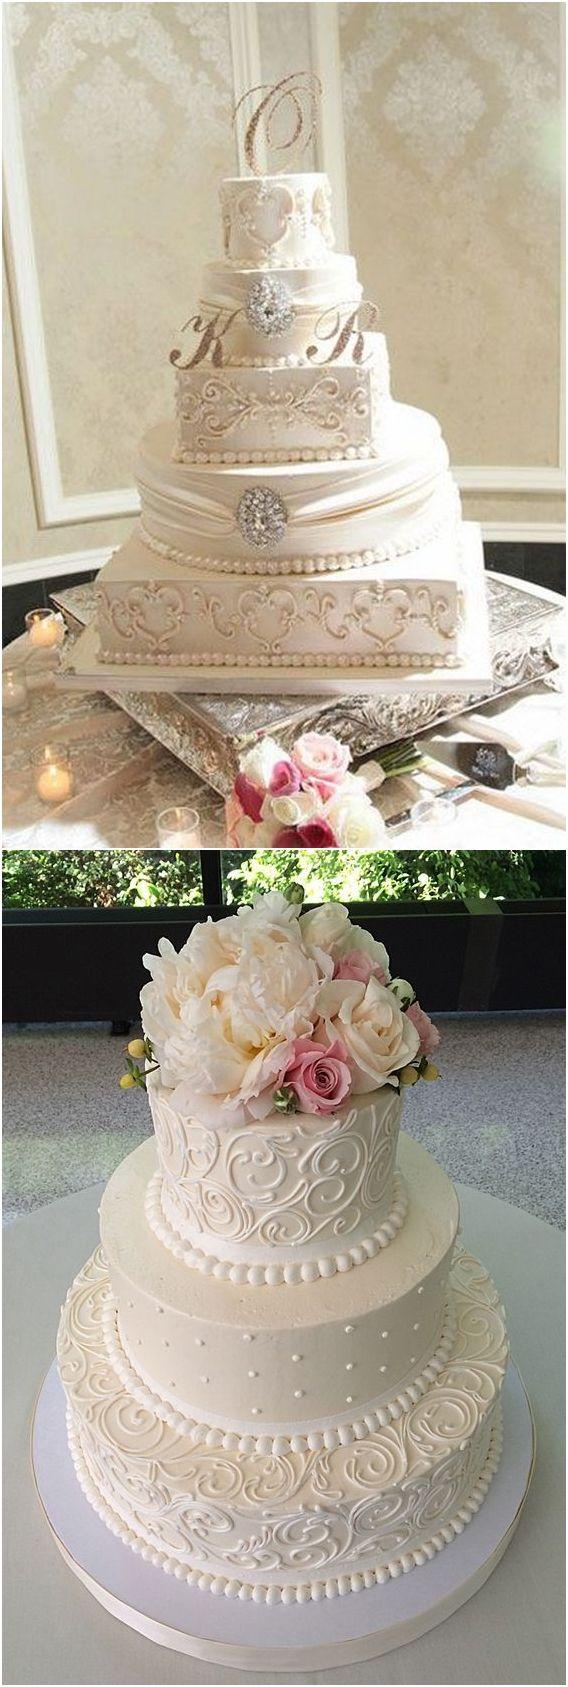 Wedding - 50 Amazing Wedding Cake Ideas For Your Special Day!